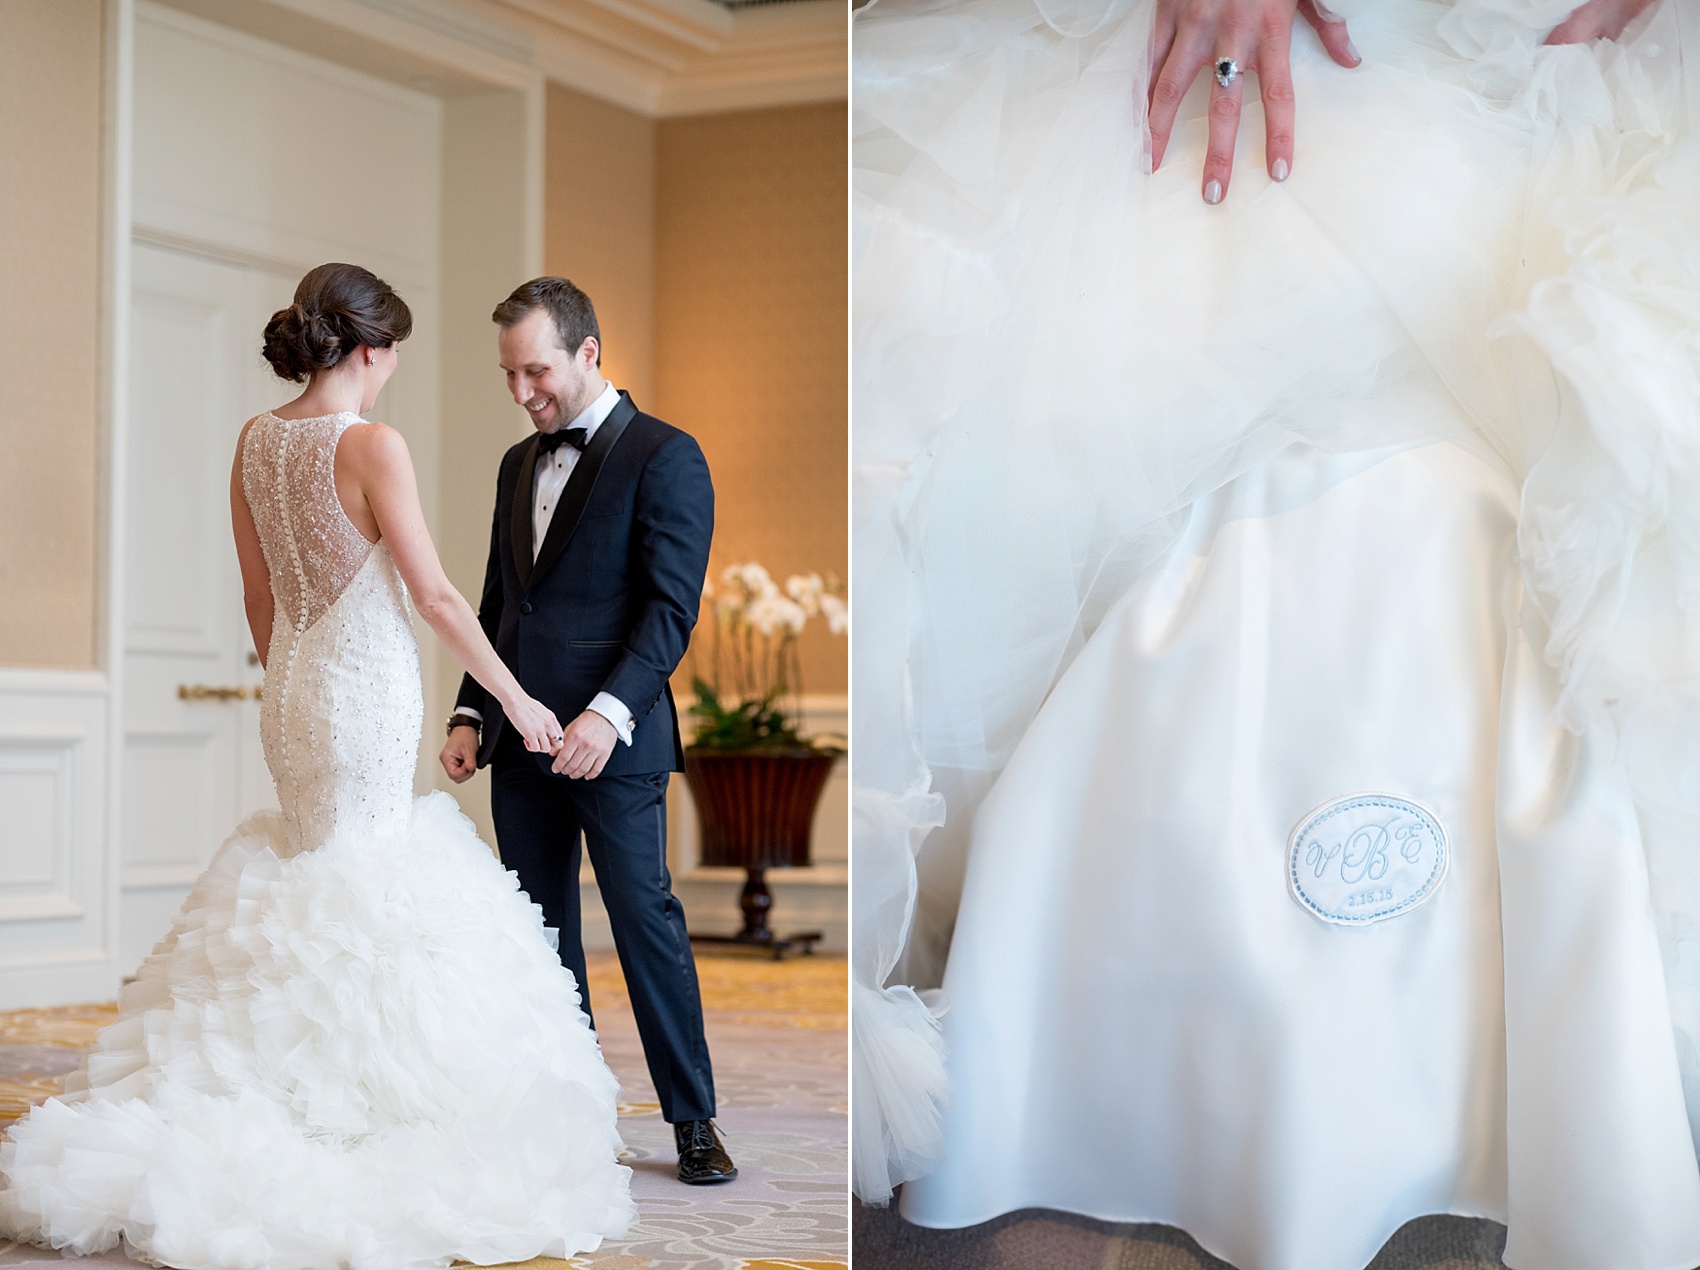 Washington, DC wedding photos by Mikkel Paige. The bride and groom's first look and the bride's monogrammed blue patch inside her wedding dress at The Ritz Carlton, Pentagon City.